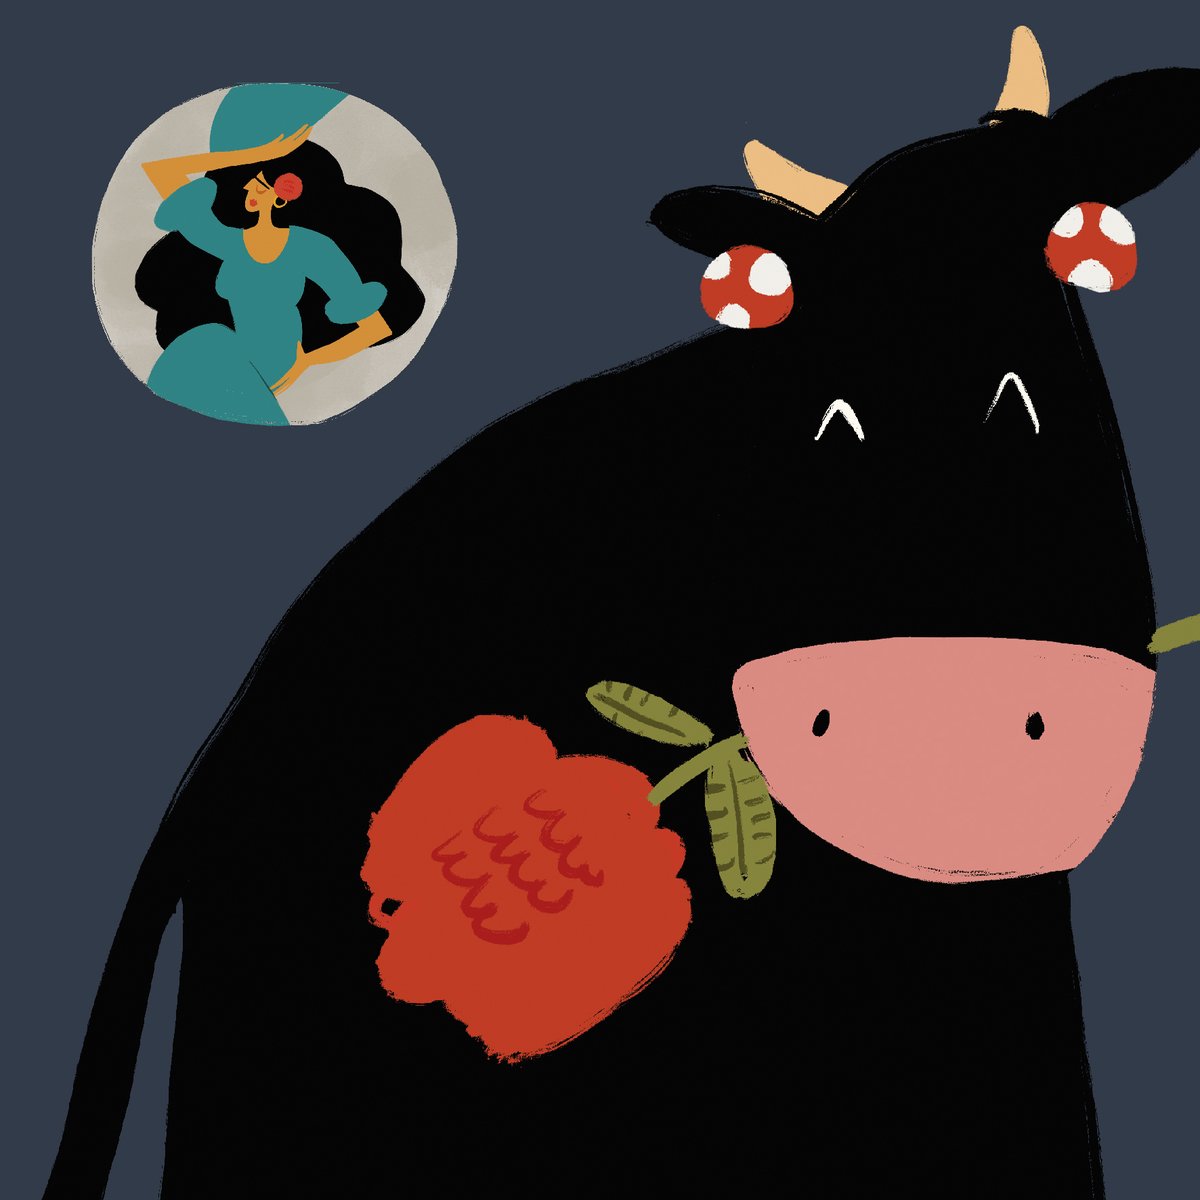 🎭 Immerse your family in the magic of dance-drama! Join us for 'The Bull and the Moon' on 9 December at 11 am. Follow the captivating journey of Lolo, a little Spanish bull, as he discovers his passion for flamenco! 🎫 Get your tickets 👉 bit.ly/bull-moon 🐂 #FamilyEvent